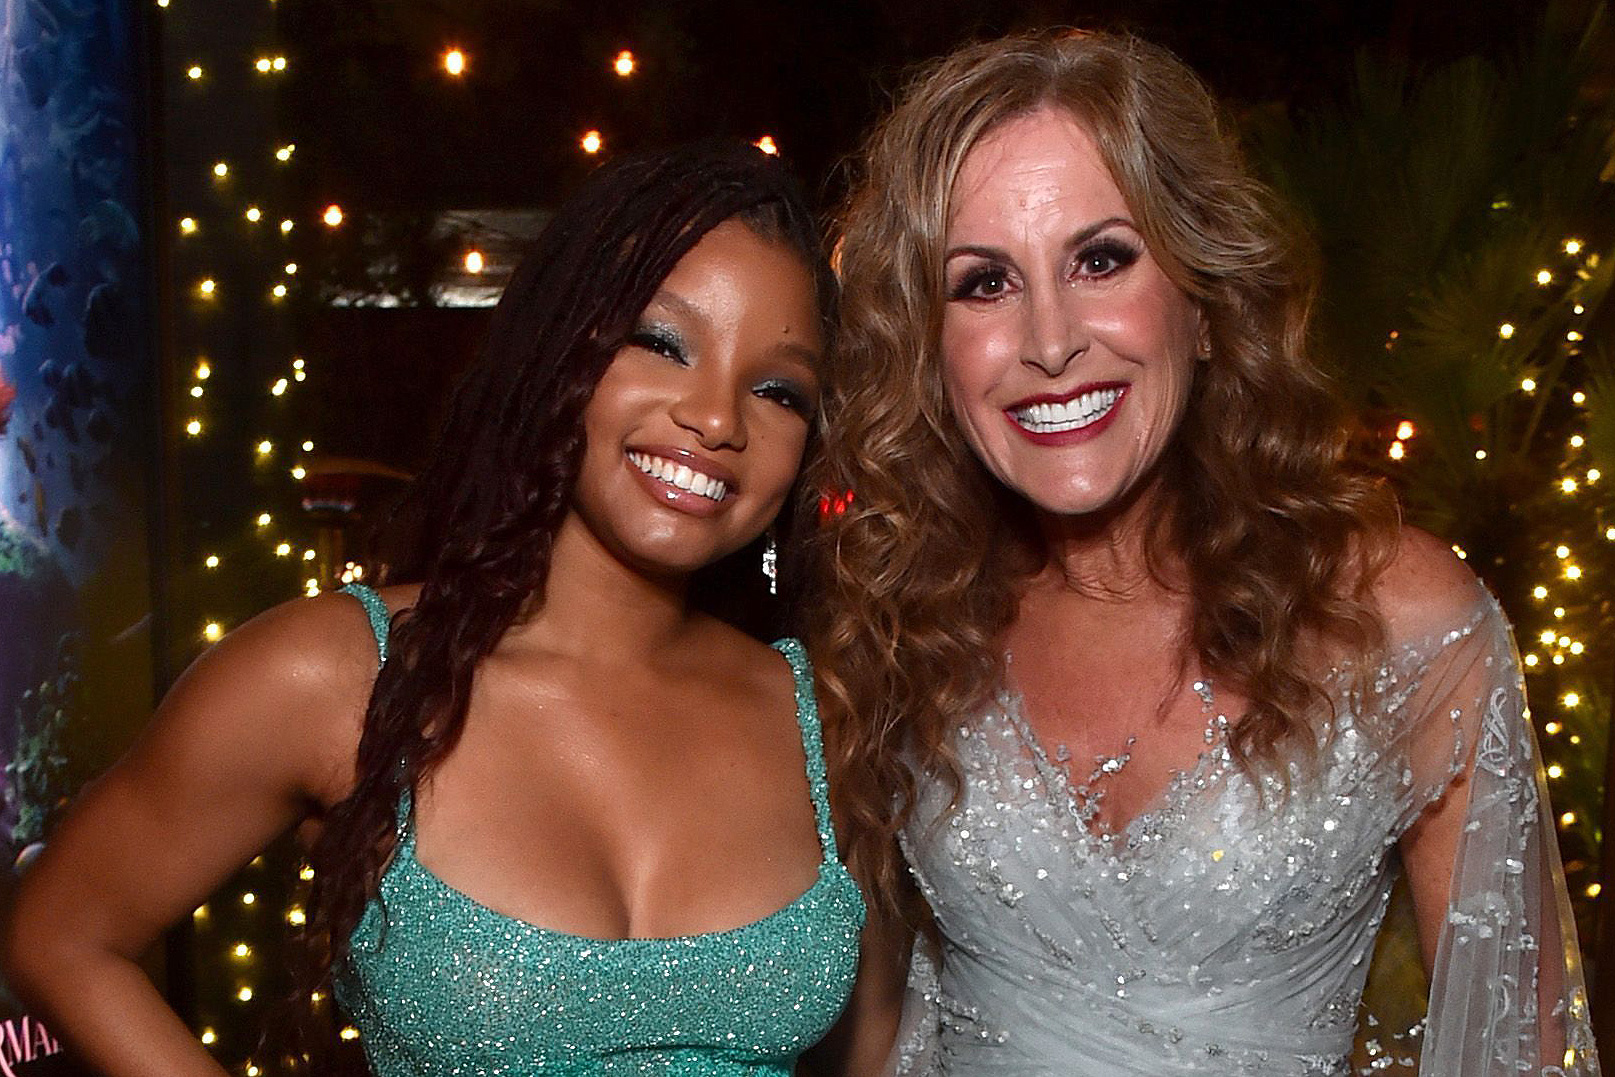 Halle Bailey and Jodi Benson attend the World Premiere of Disney's live-action feature "The Little Mermaid" at the Dolby Theatre in Los Angeles, California on May 08, 2023.